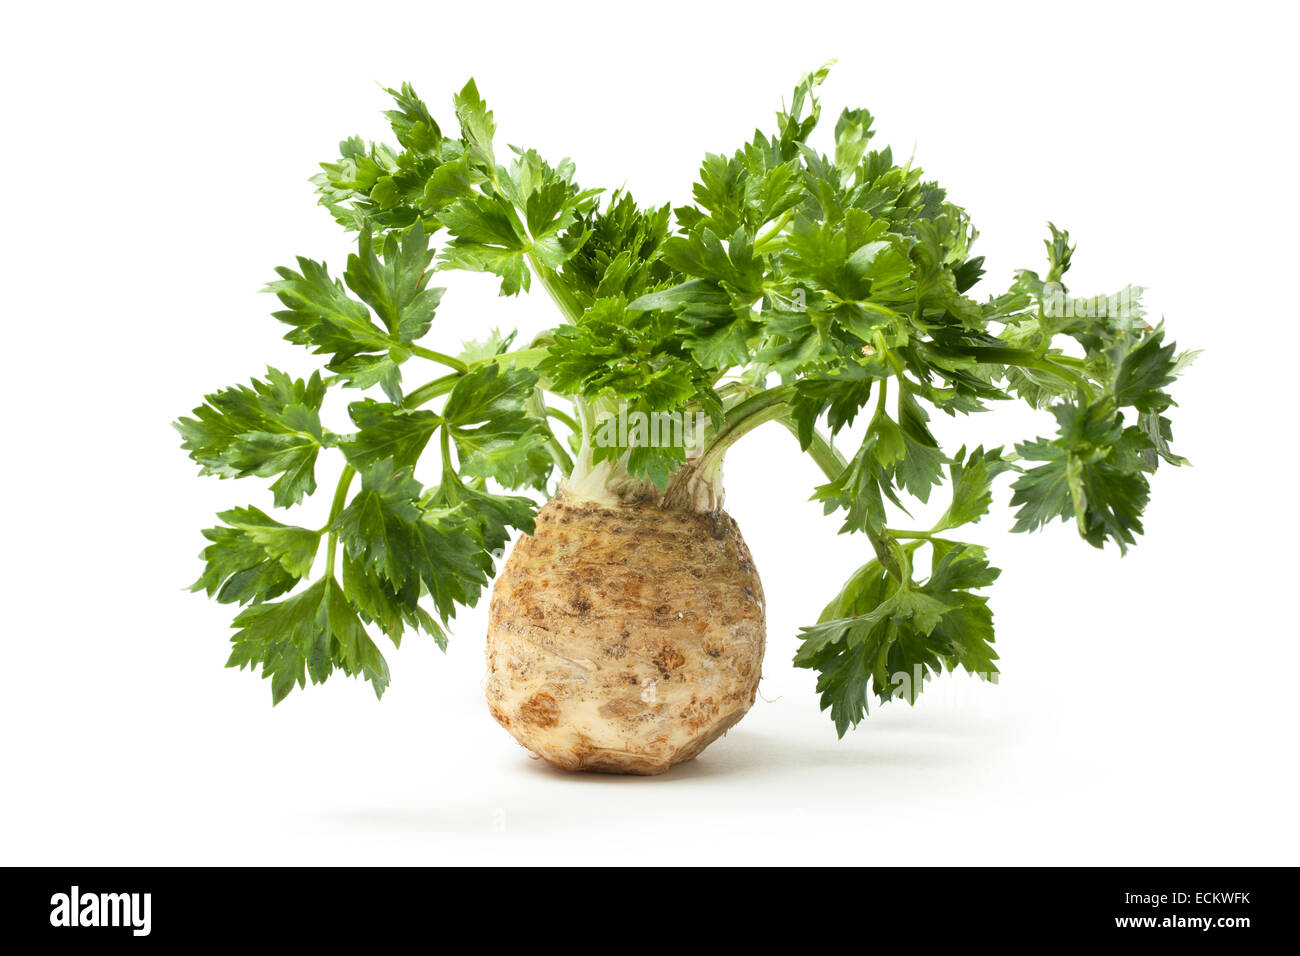 Celery leafs with root isolated on white. Stock Photo